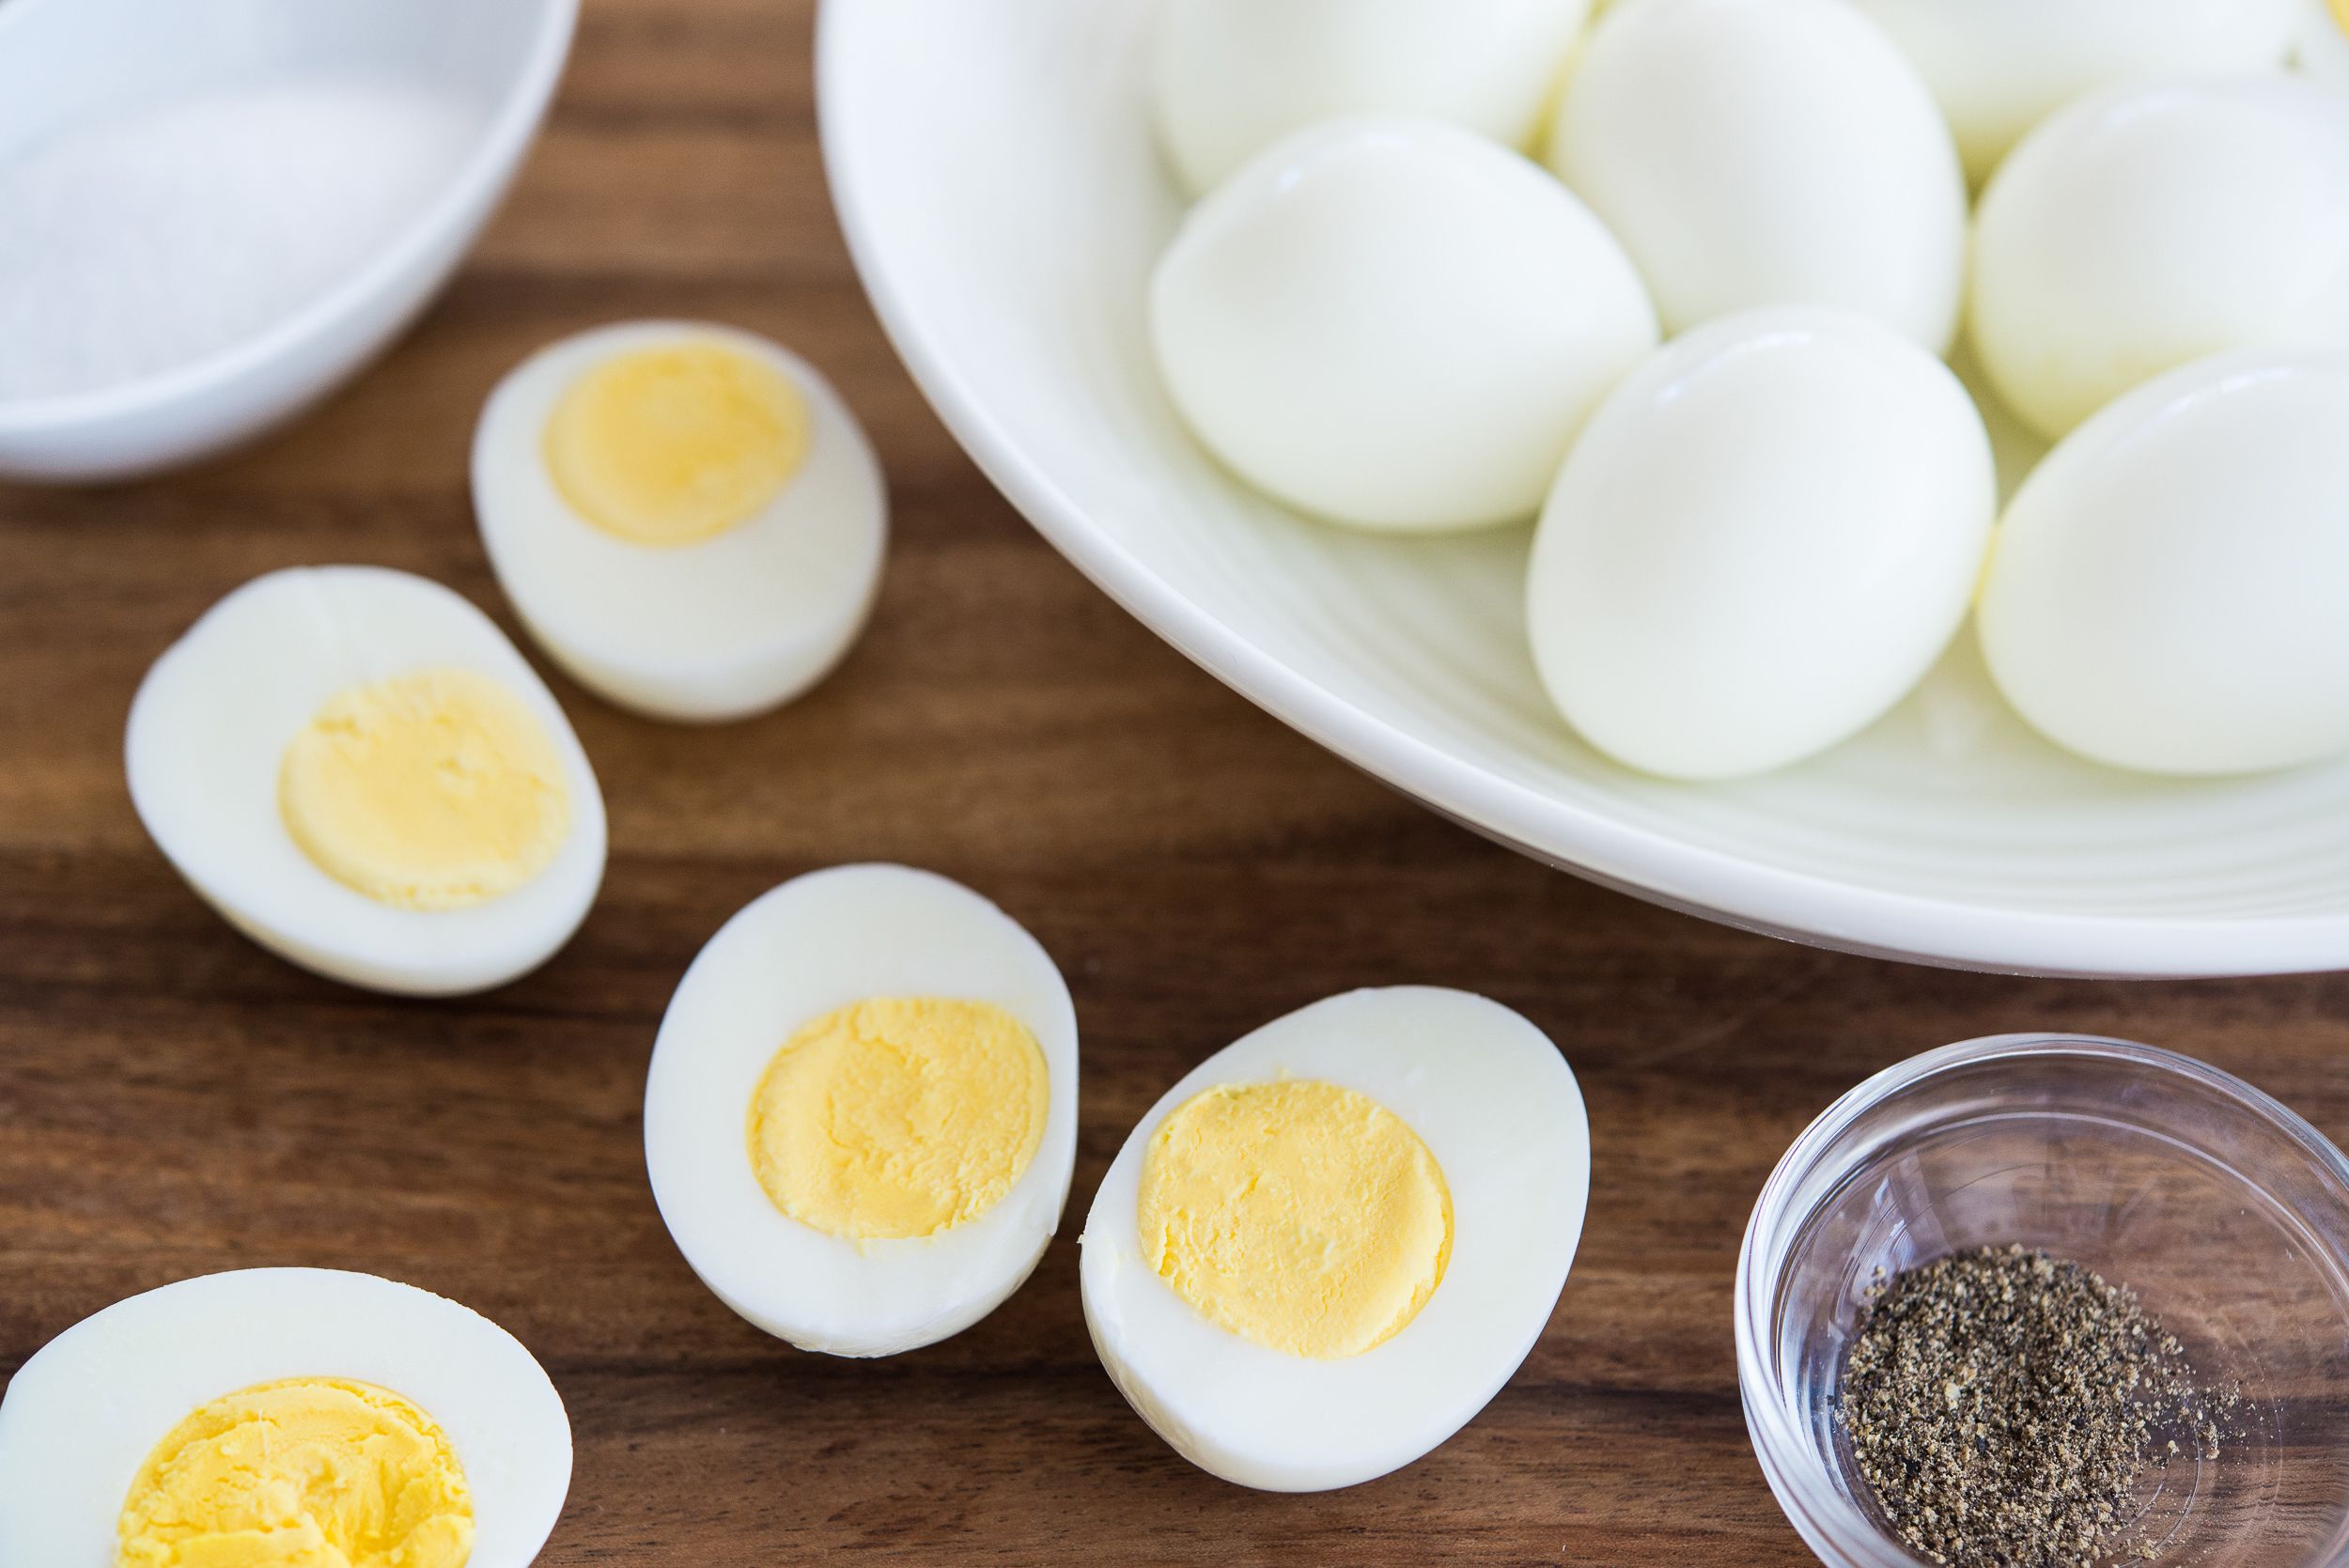 https://hips.hearstapps.com/thepioneerwoman/wp-content/uploads/2015/10/perfect-easy-to-peel-hard-boiled-eggs-091.jpg